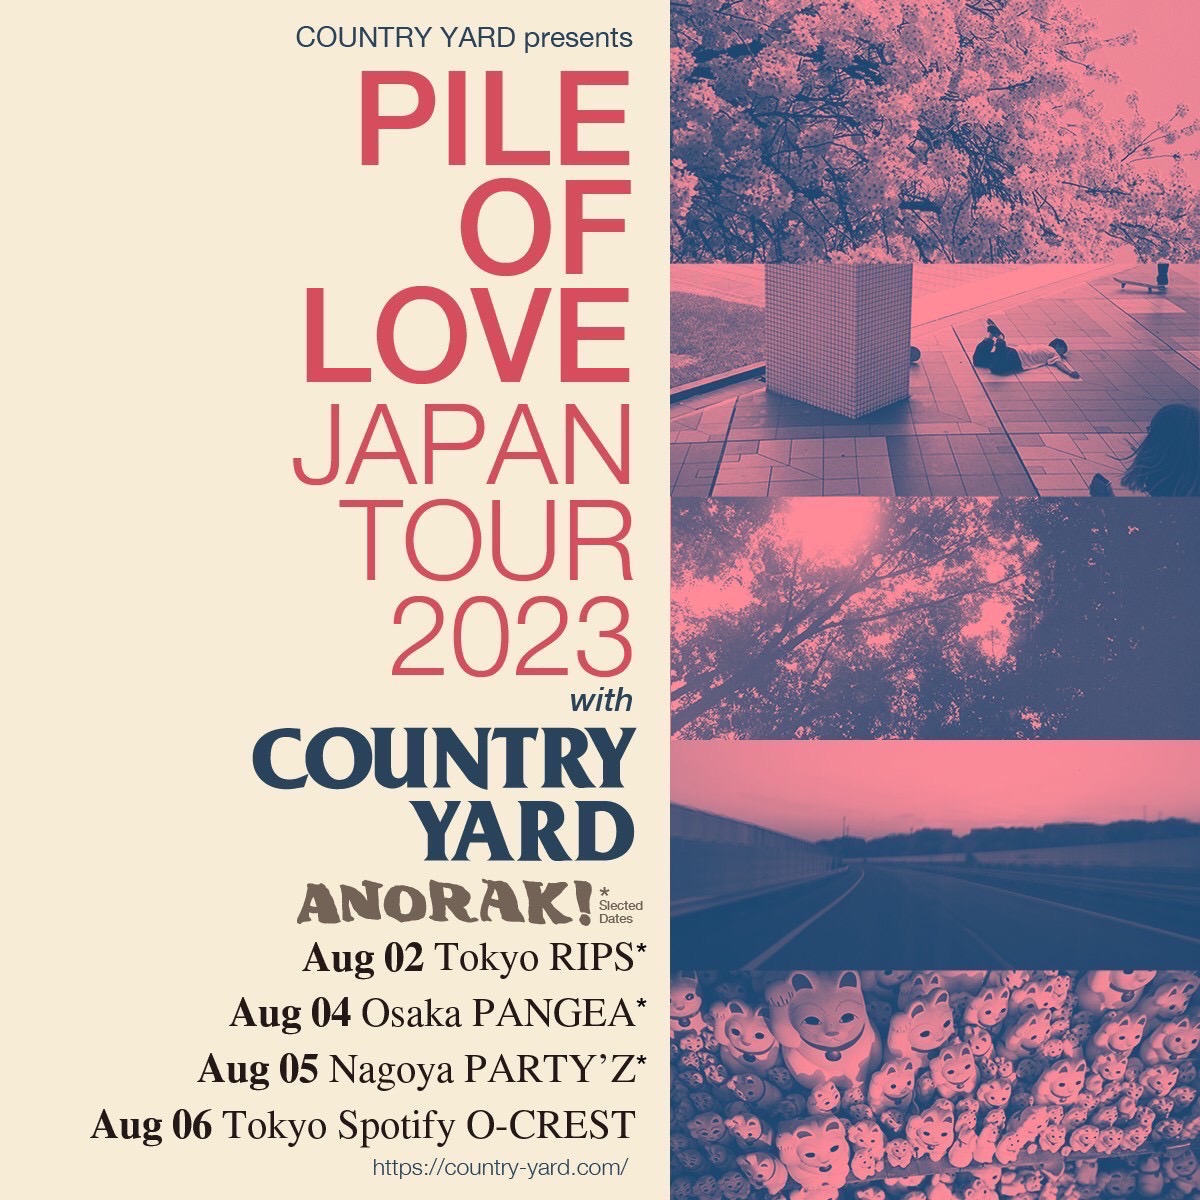 COUNTRY YARD pre PILE OF LOVE JAPAN TOUR 2023